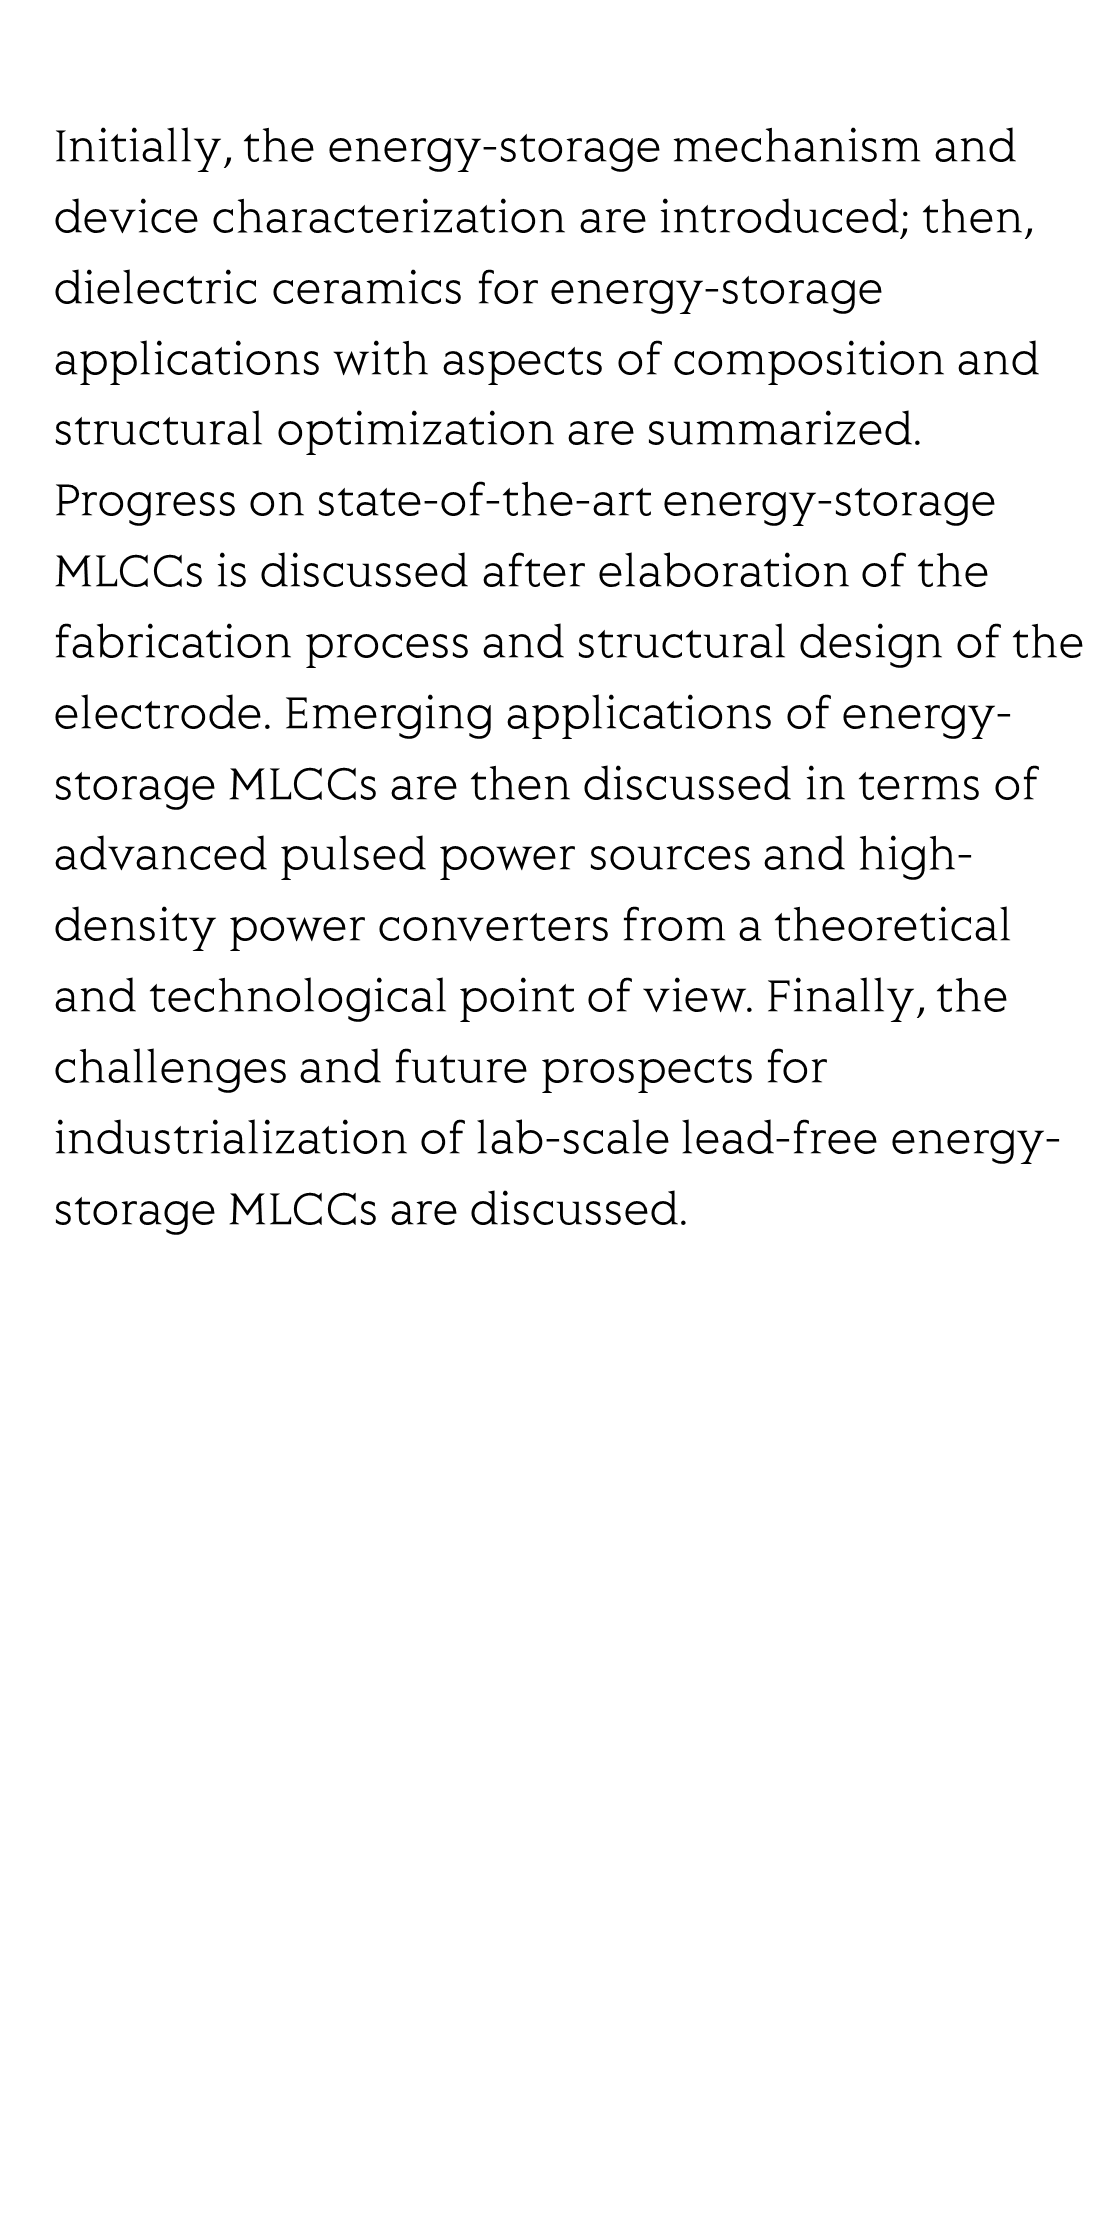 Perspectives and challenges for lead-free energy-storage multilayer ceramic capacitors_3